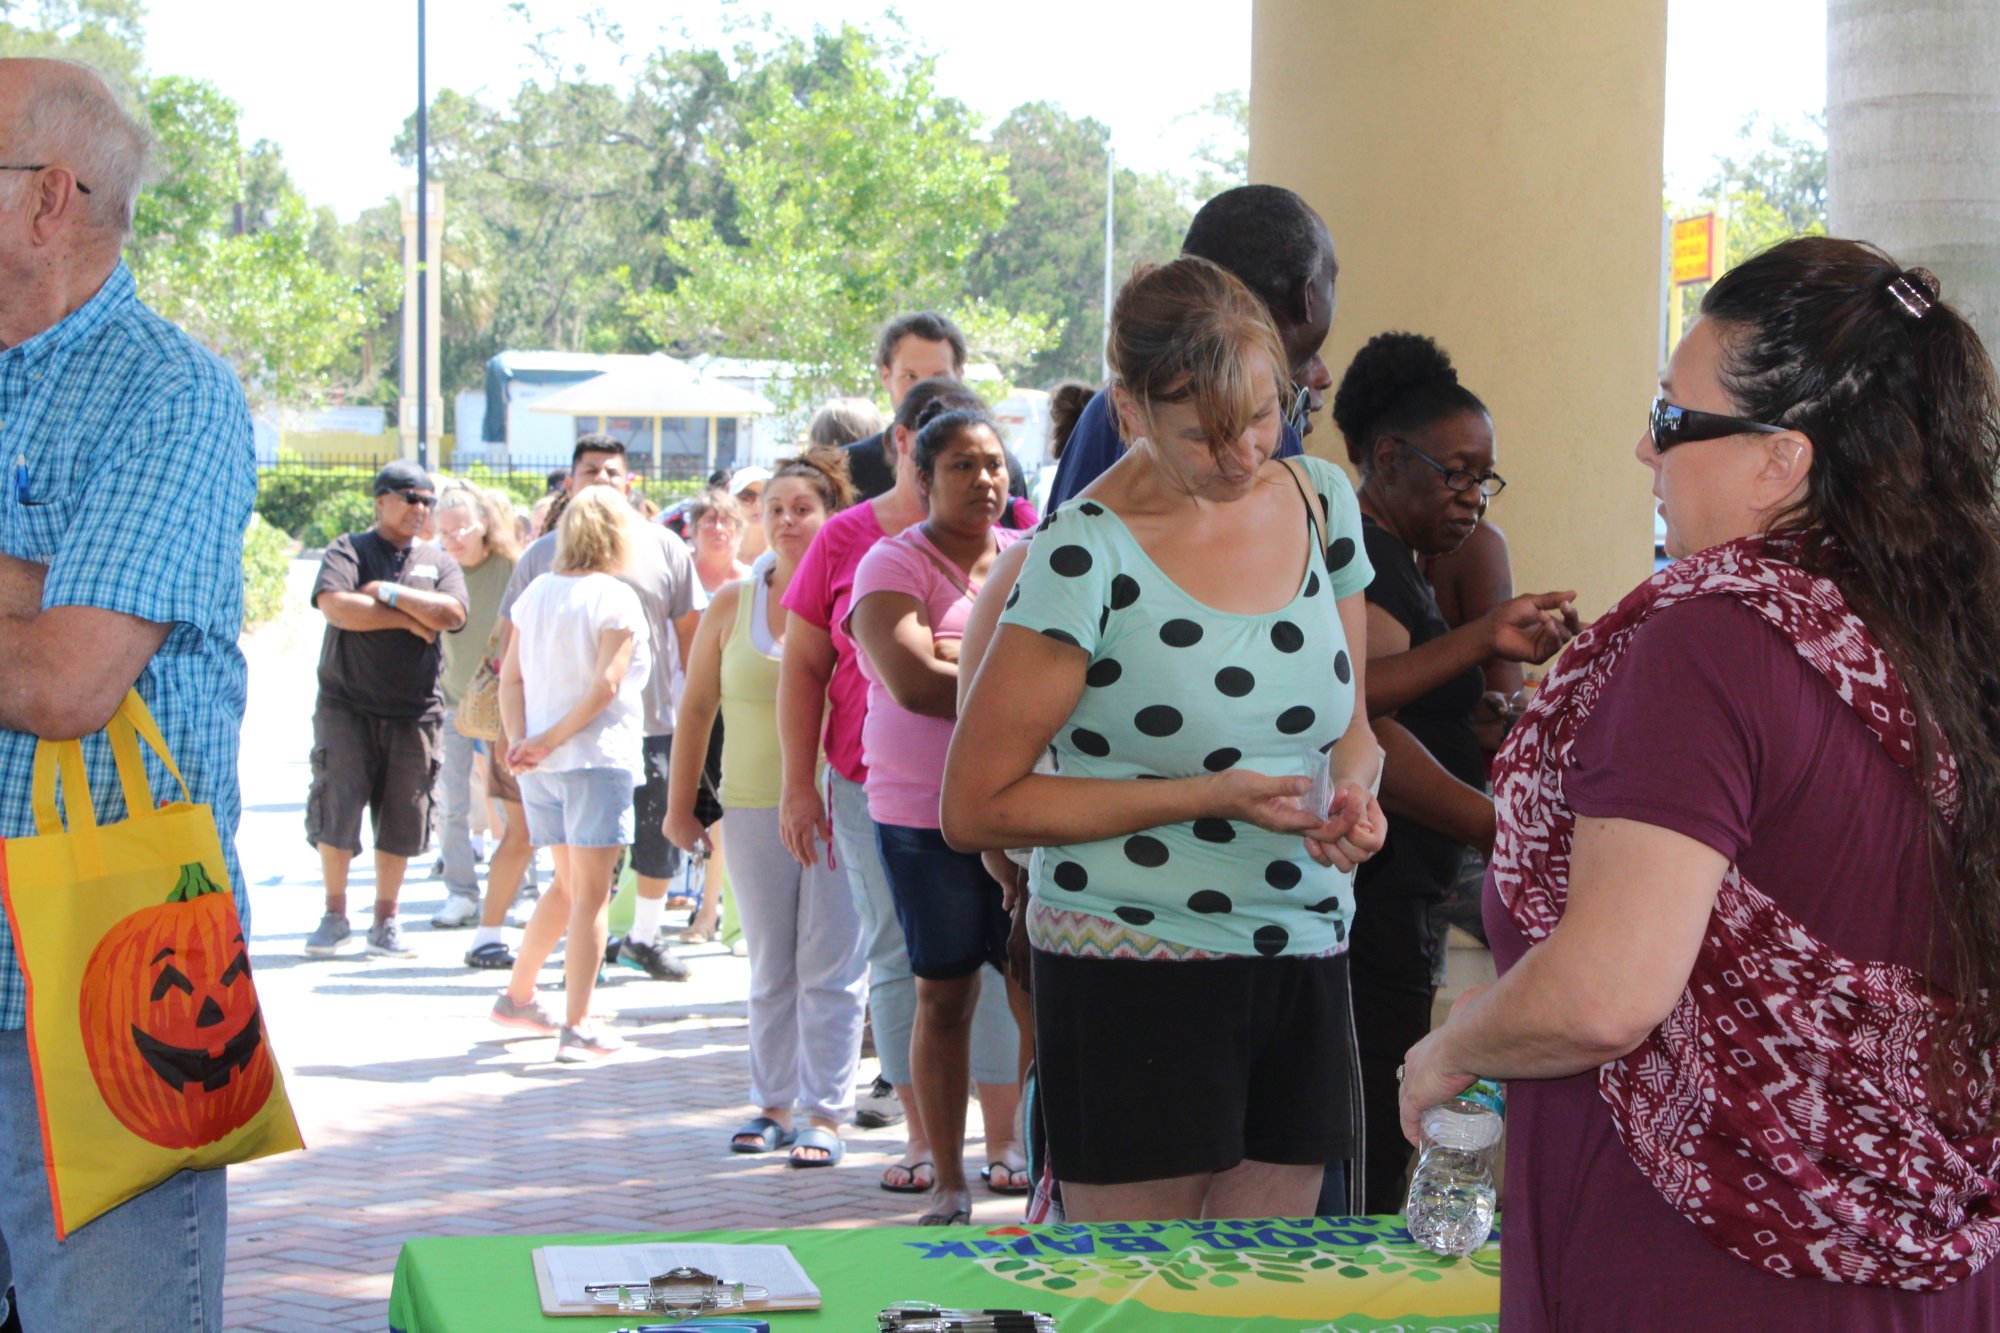 Manatee County residents wait in line for free water and food provided by The Food Bank of Manatee.